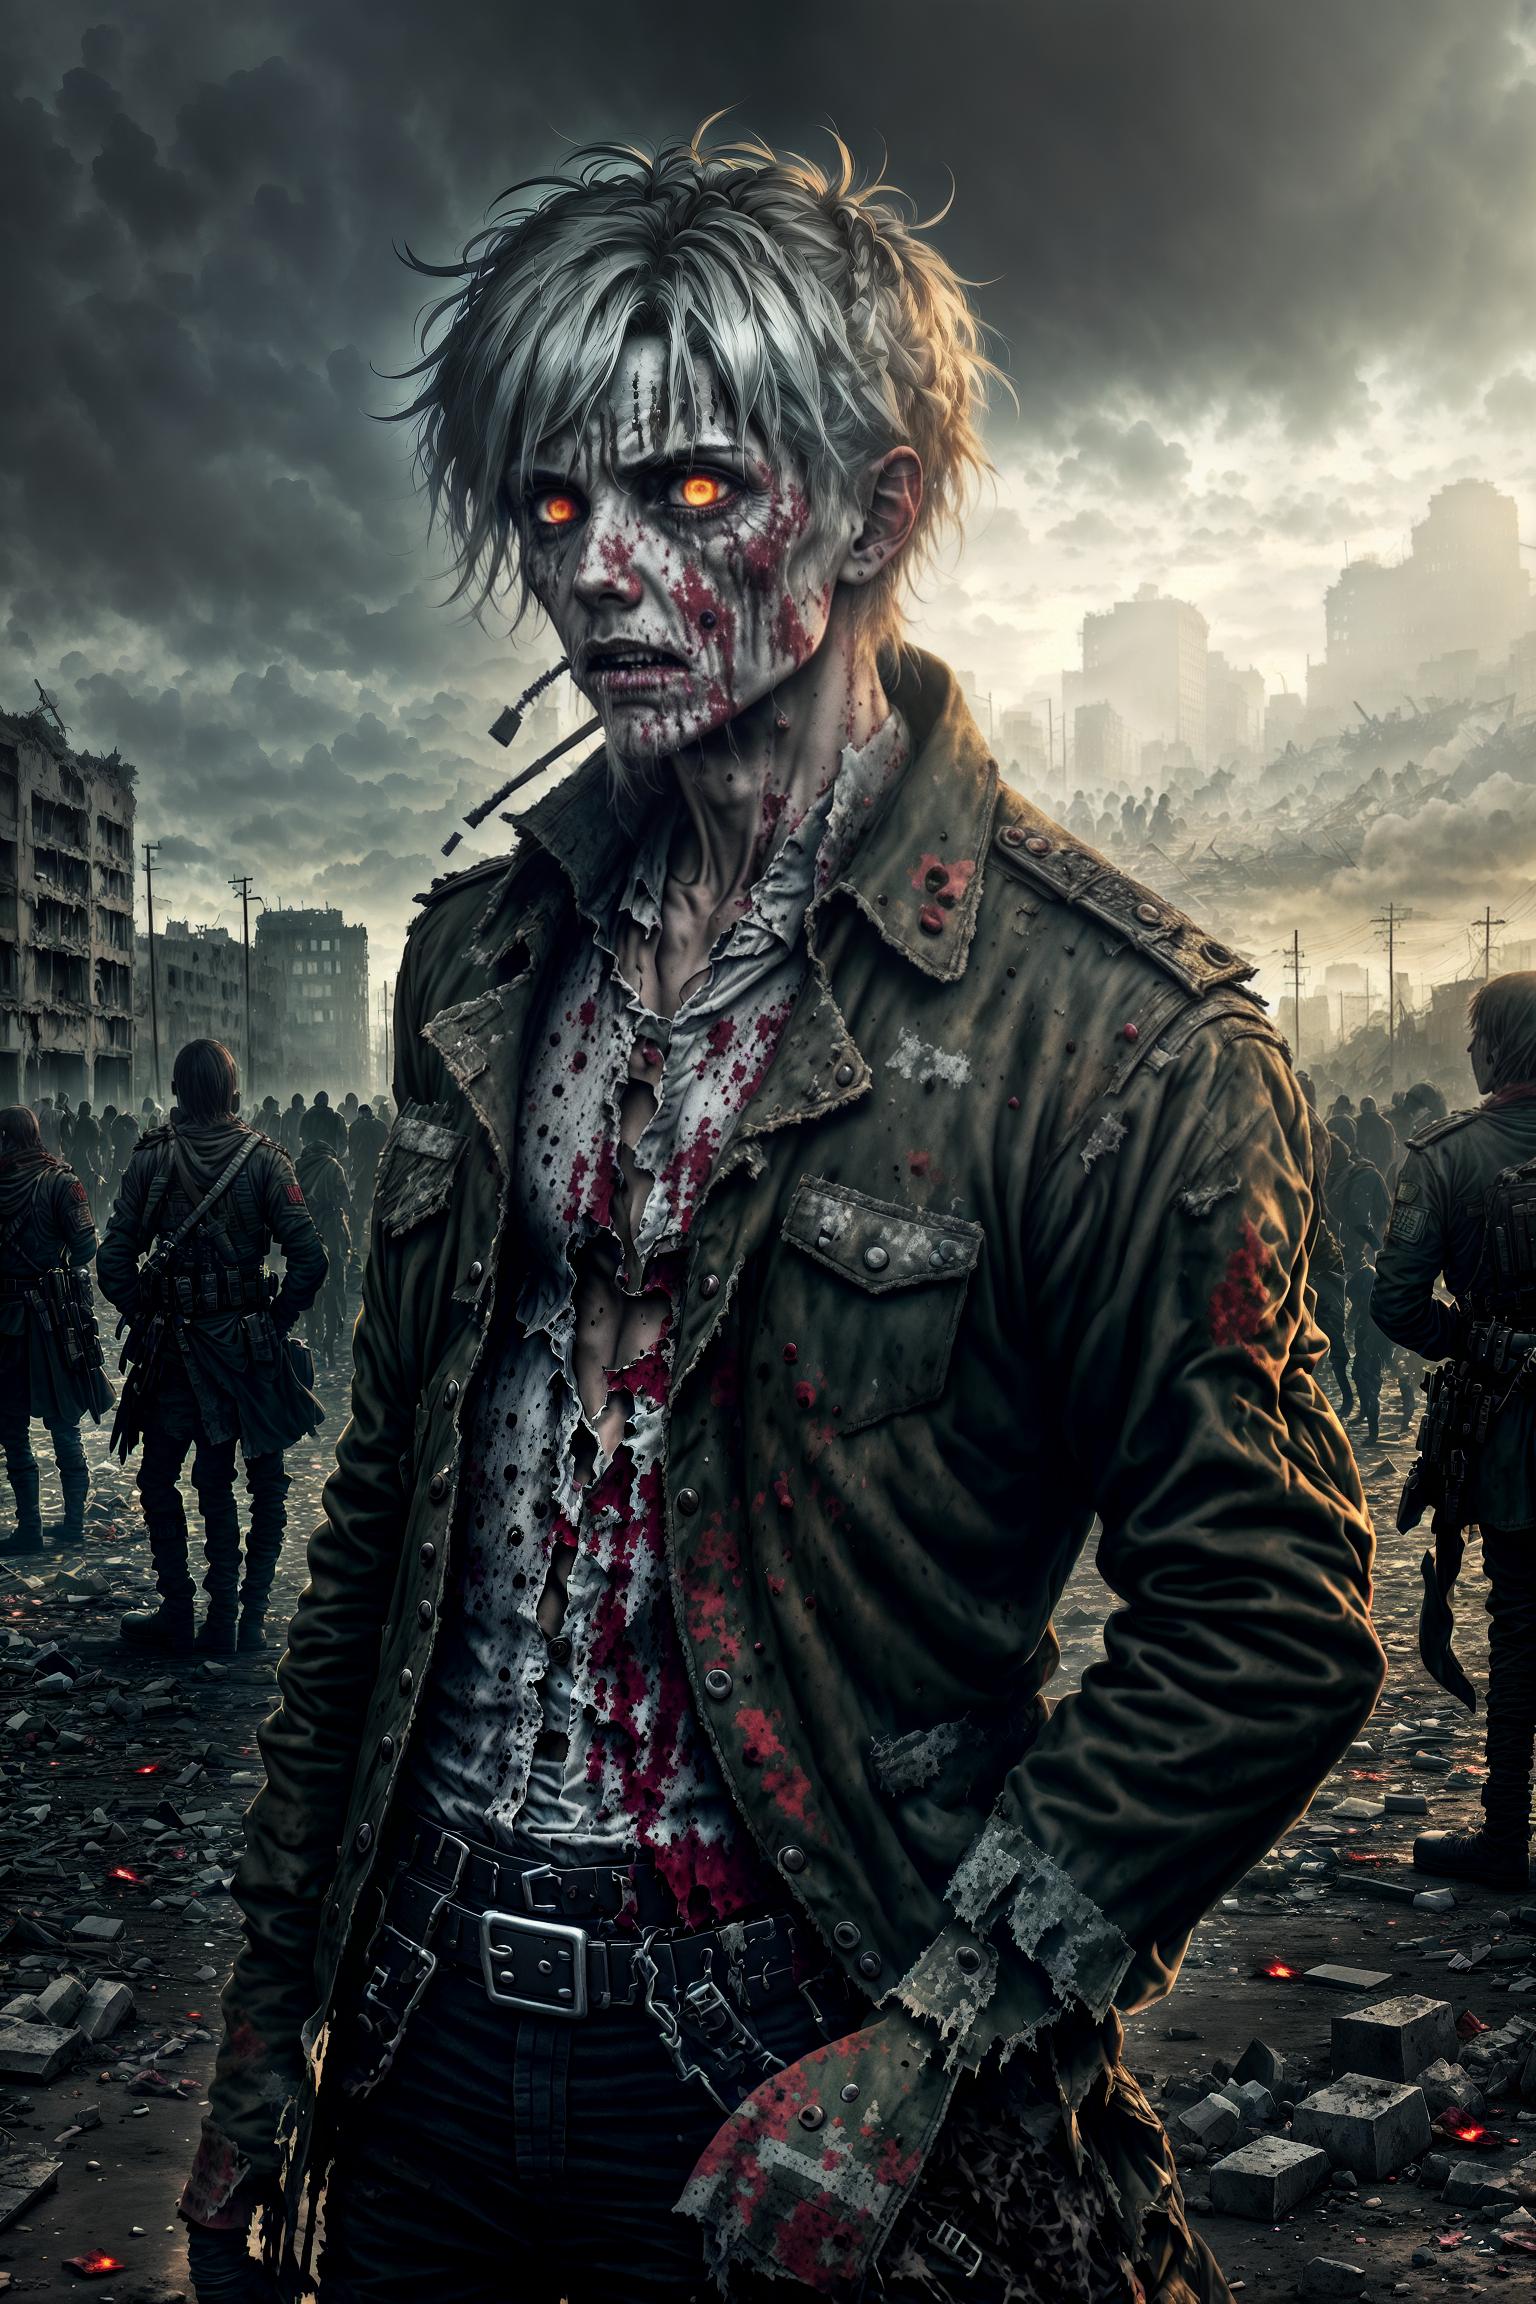  Zombie,(male dried corpse:1.3), (rotten skin:1.2), (tattered clothing:1.0), (lifeless gaze:1.0), (zombie's eyes are usually empty), (bloodstains and wounds:1.0), (obvious bite marks or torn wounds on the body), (surrounded by dried or fresh bloodstains), (ruins environment:1.2), (main scene should be in the urban ruins left after destruction), (surrounded by collapsed buildings, broken vehicles, etc.), (to show that human civilization has fallen), (army gathering:1.0), (displaying a large number of zombies gathering into an army), (presenting a shocking and desperate feeling), (horror atmosphere:1.0), (the lighting in the scene should be dark and harsh), (using elements such as clouds, smoke, etc.), (to create a sense of oppression and inse